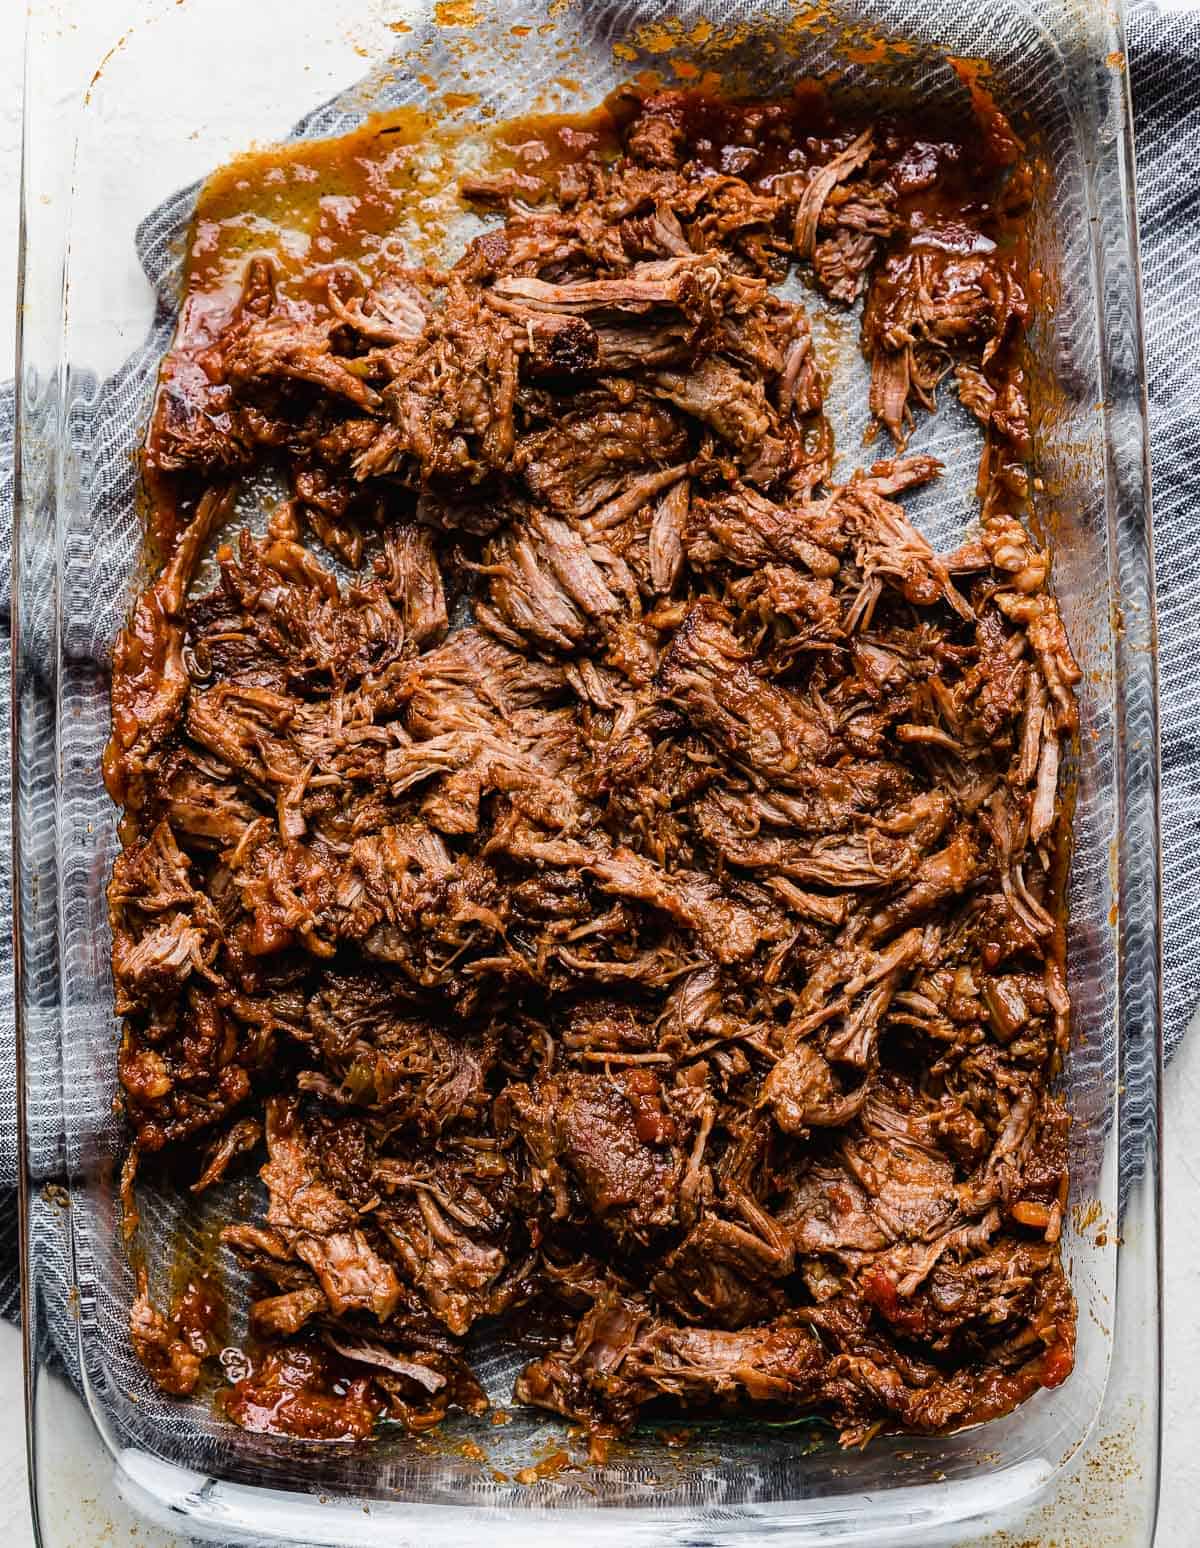 Shredded beef in a glass baking dish for making the best beef Ragu recipe.